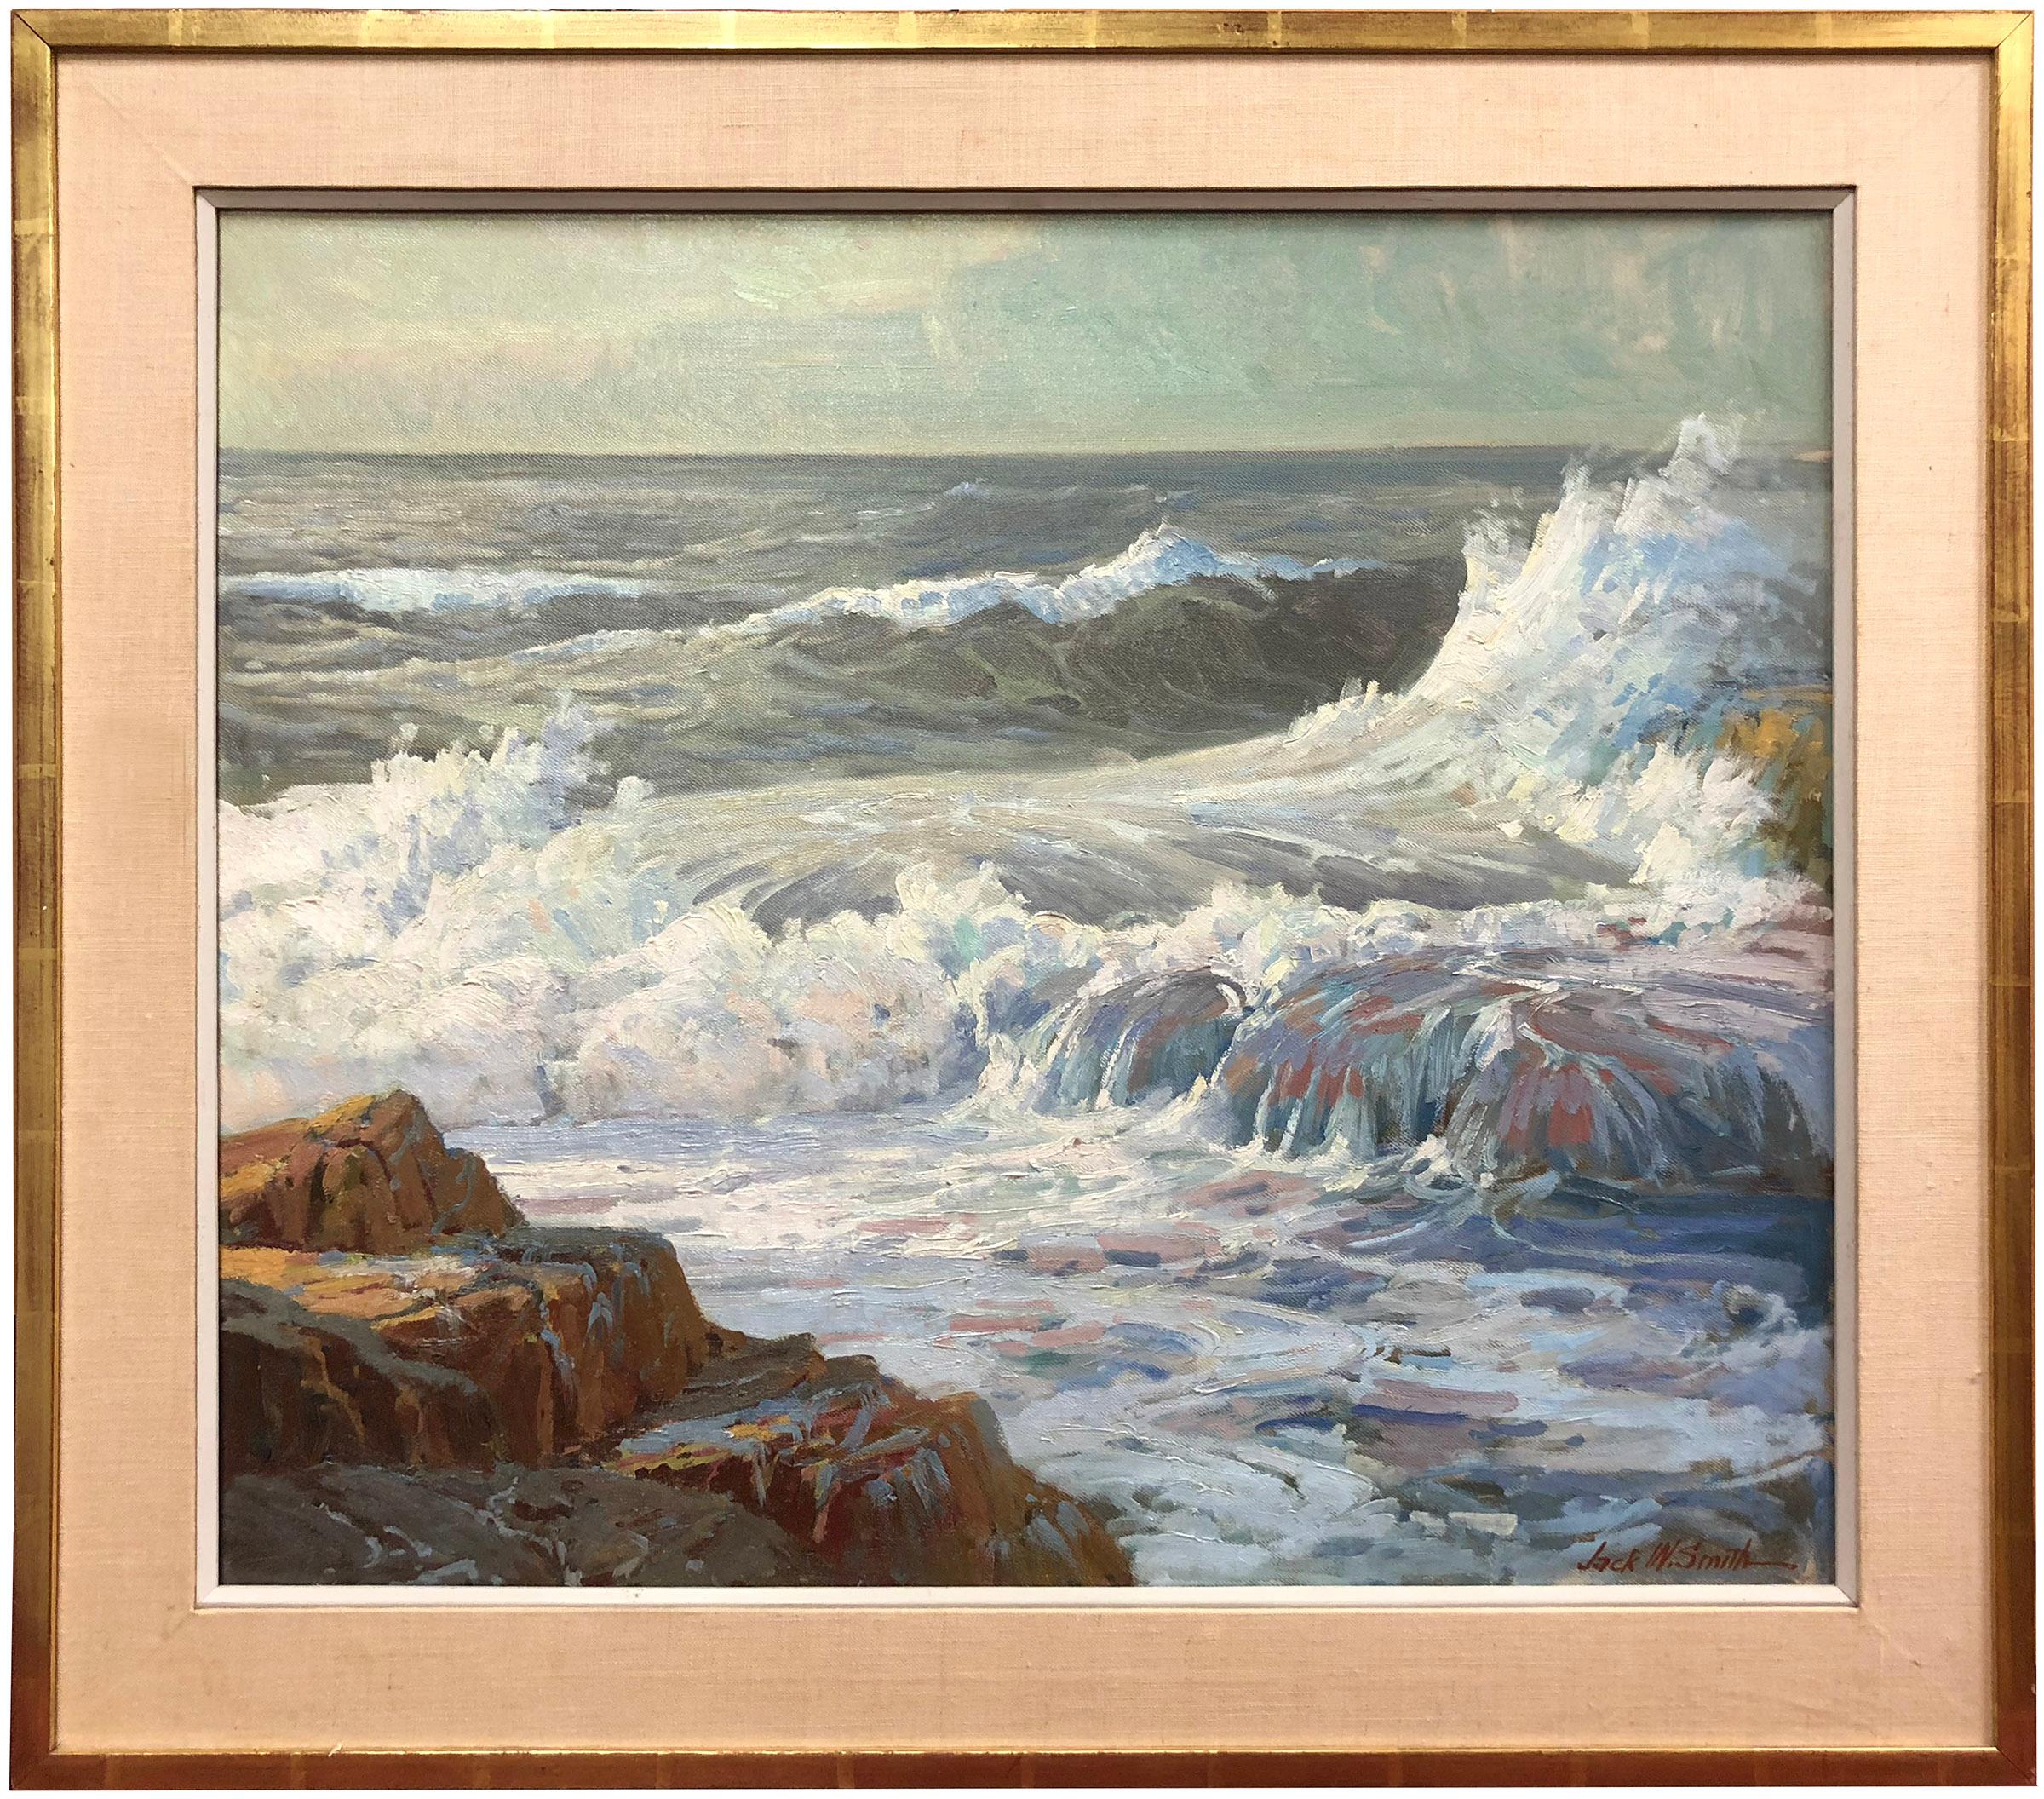 Breaking Waves - Painting by Jack Wilkinson Smith